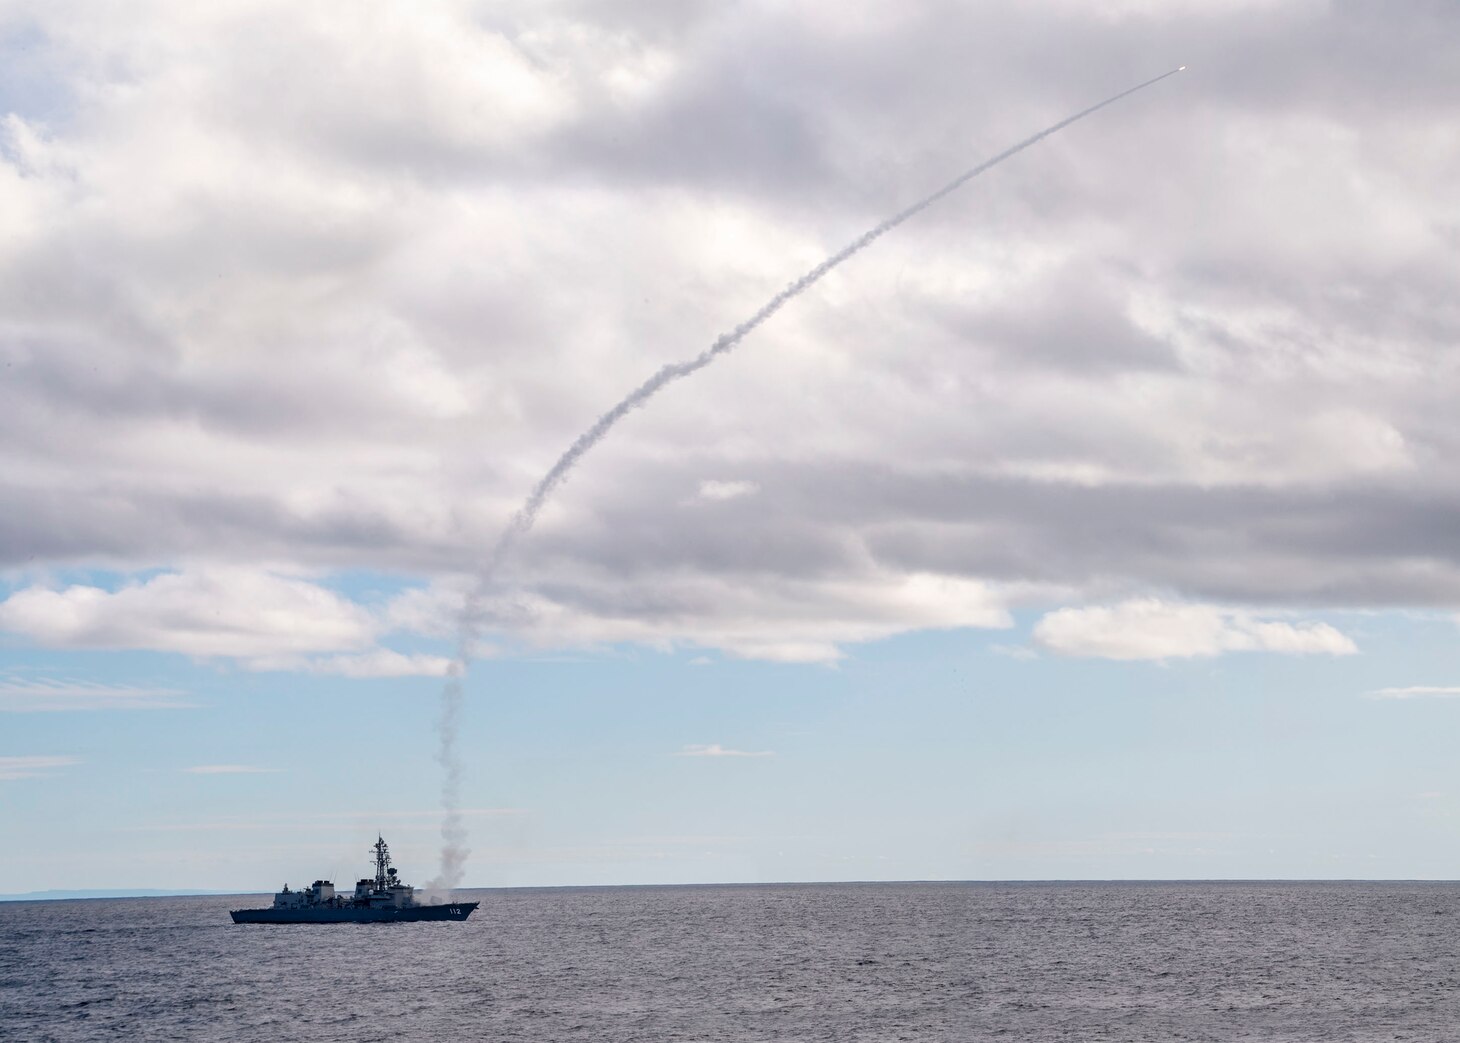 210707-N-HG846-1074 TASMA SEA (July 7, 2021) – Japan Maritime Self Defense Force Takanami-class destroyer JS Makinami (DD 112) conducts a VLRIM-7M live-fire missile exercise during exercise Pacific Vanguard 2021. Pacific Vanguard, an exercise involving U.S., Australian, Republic of Korea navies and Japan Maritime Self Defense Force, is designed to strengthen maritime operations in the multilateral environment. (U.S. Navy photo composite by Mass Communication Specialist 3rd Class Daniel Serianni)